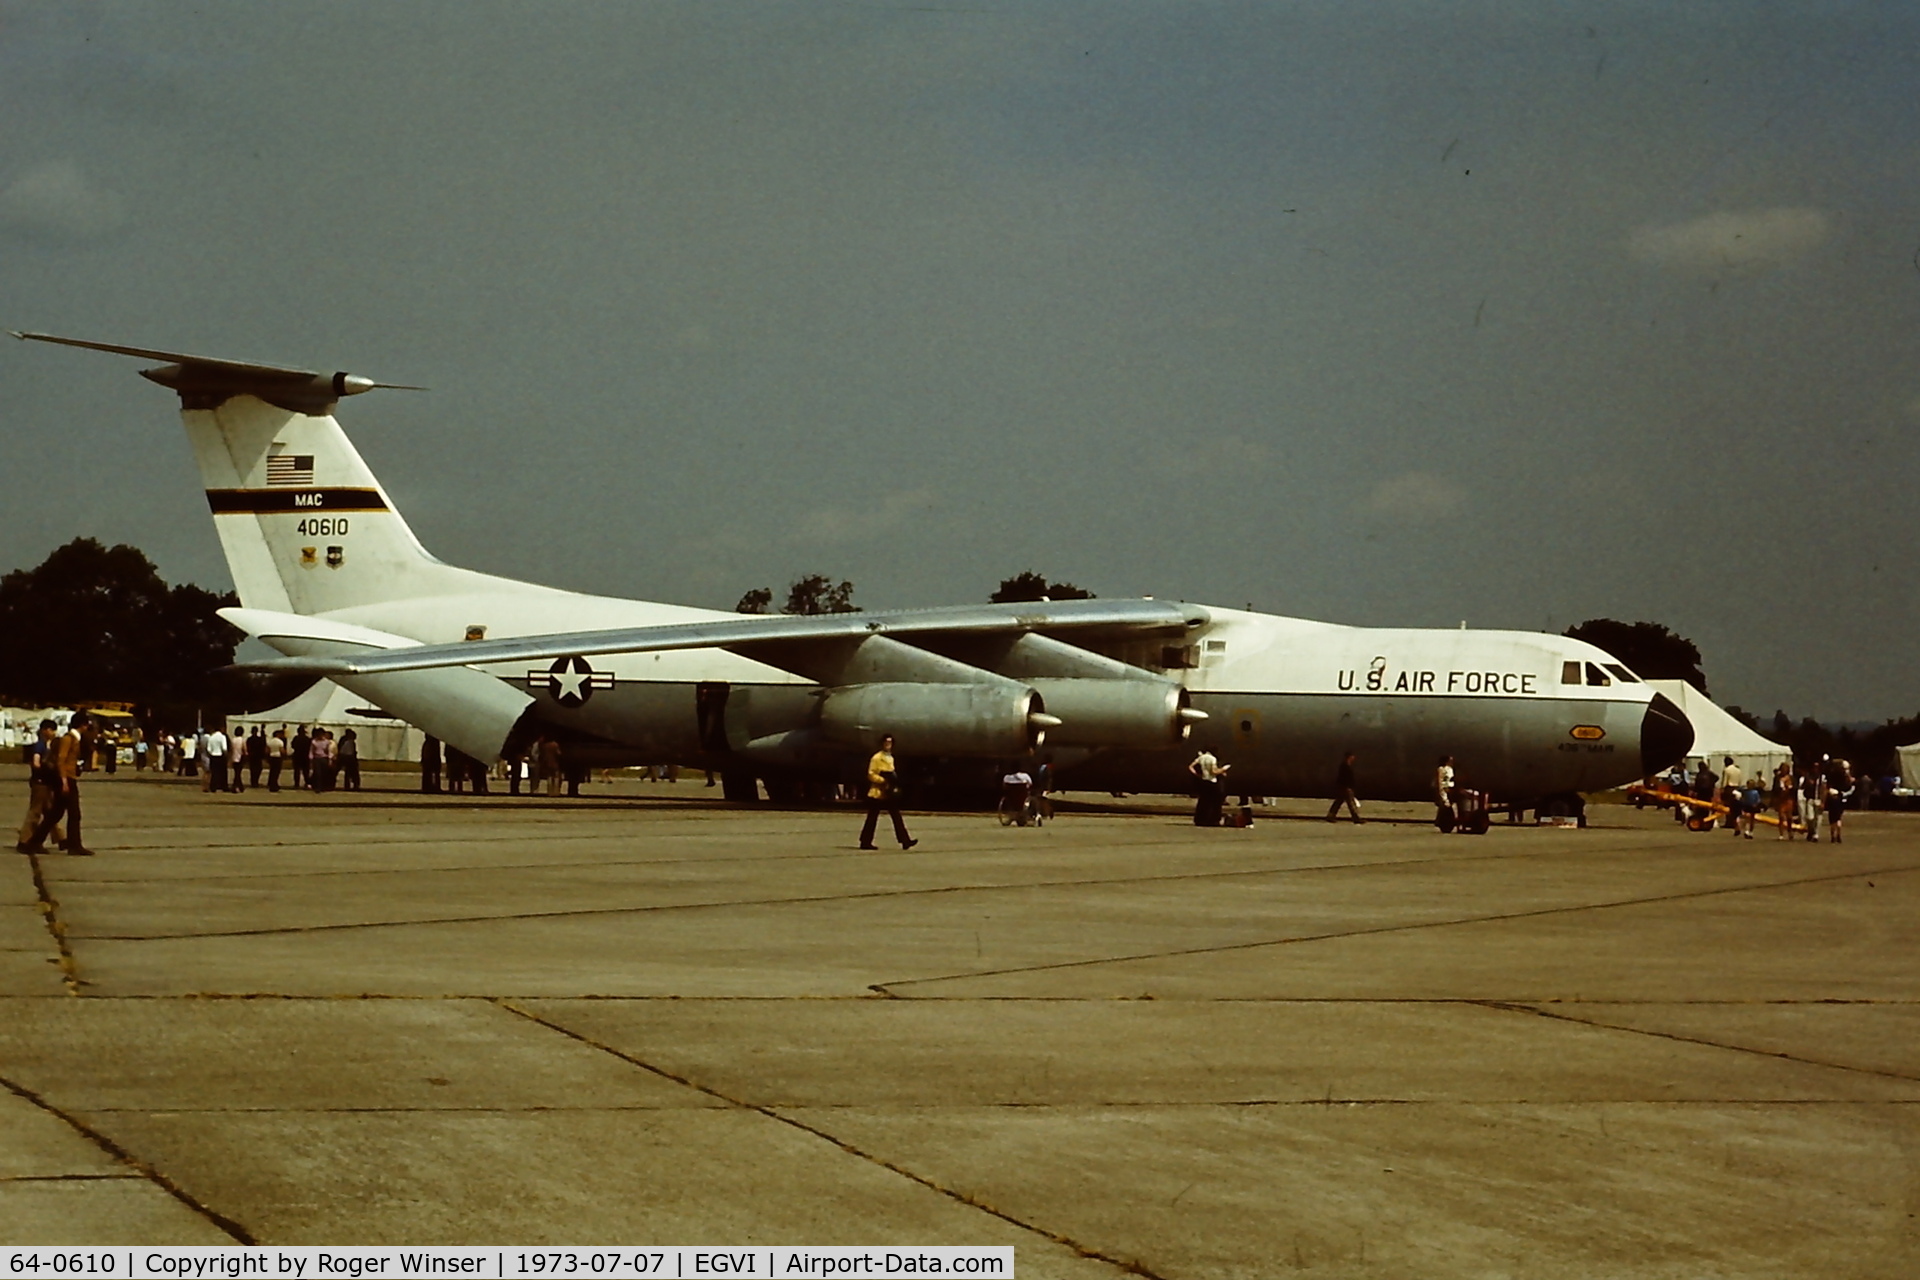 64-0610, 1964 Lockheed C-141A Starlifter C/N 300-6023, Marked 40610 at RAF Greenham Common for IAT 1973